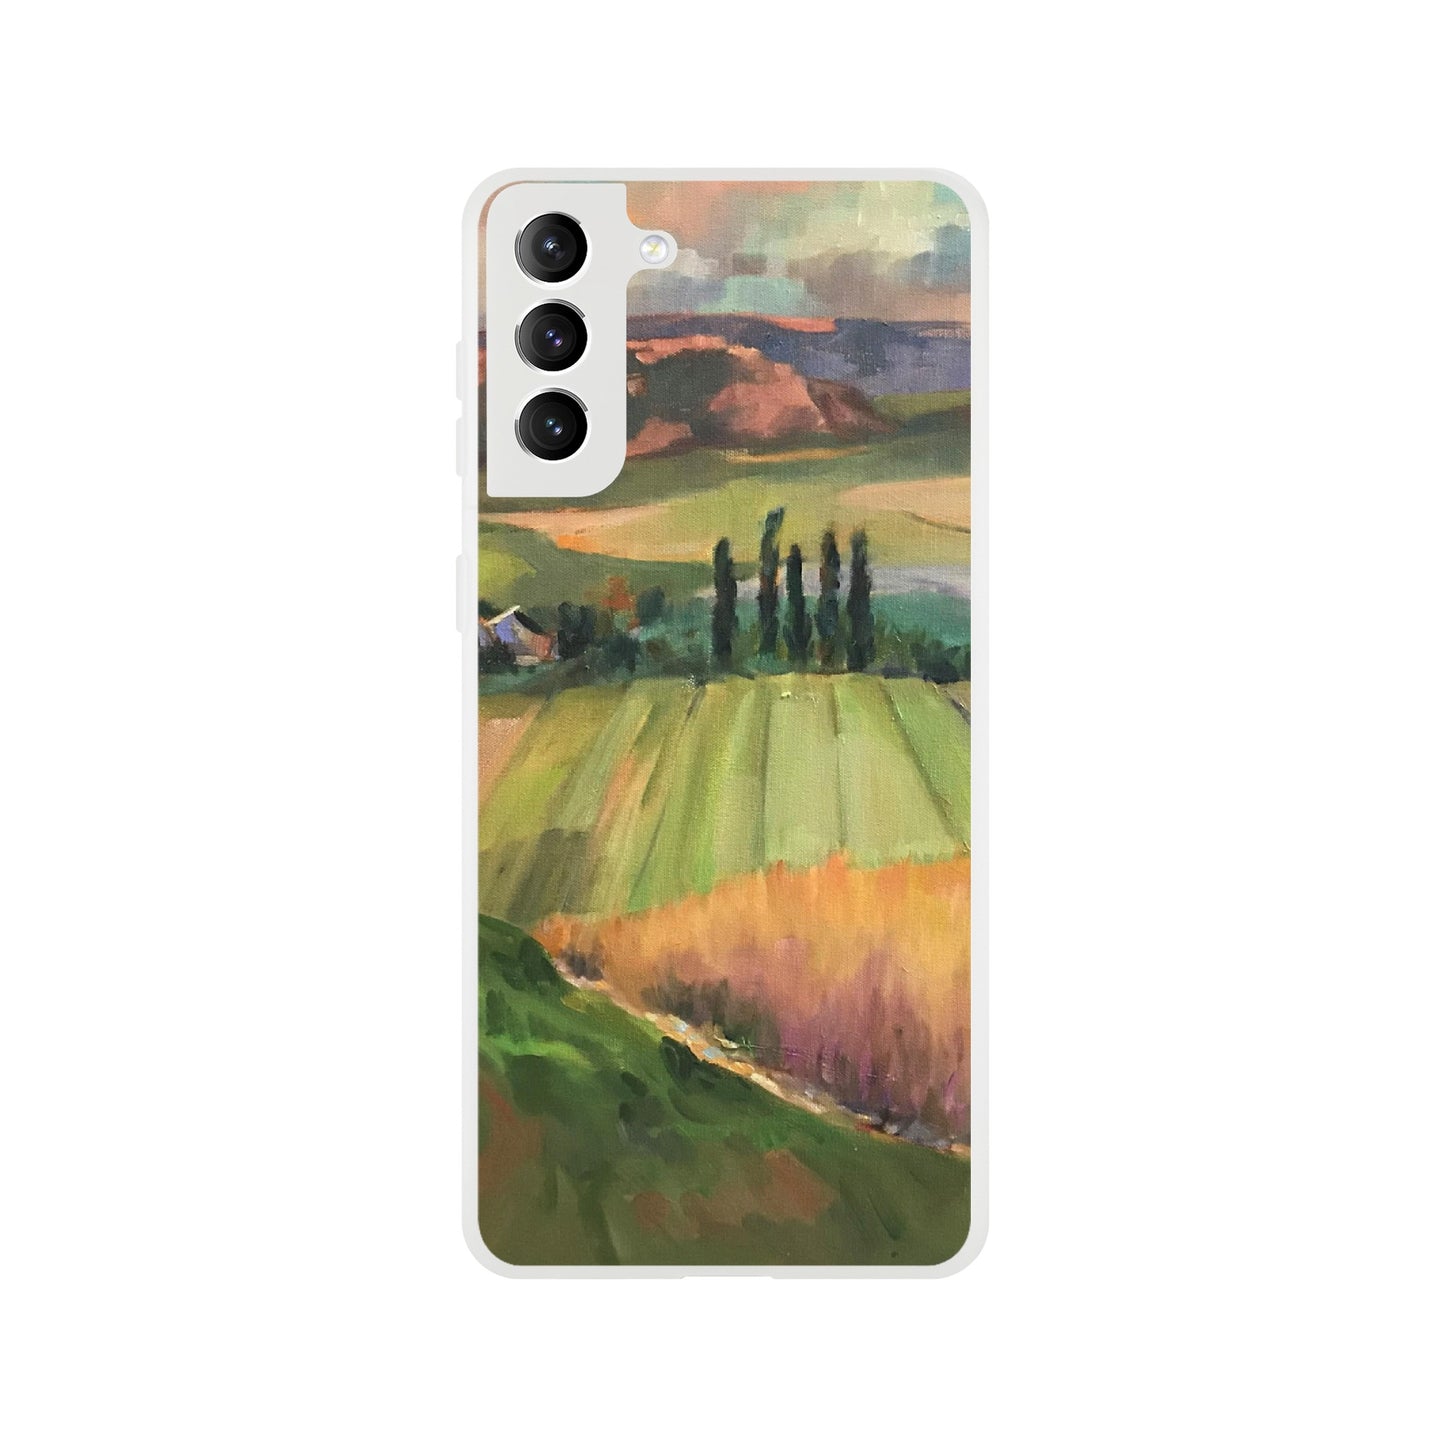 "Pastoral Landscape" Flexi Phone Case for Iphone or Samsung by Barbara Cleary Designs